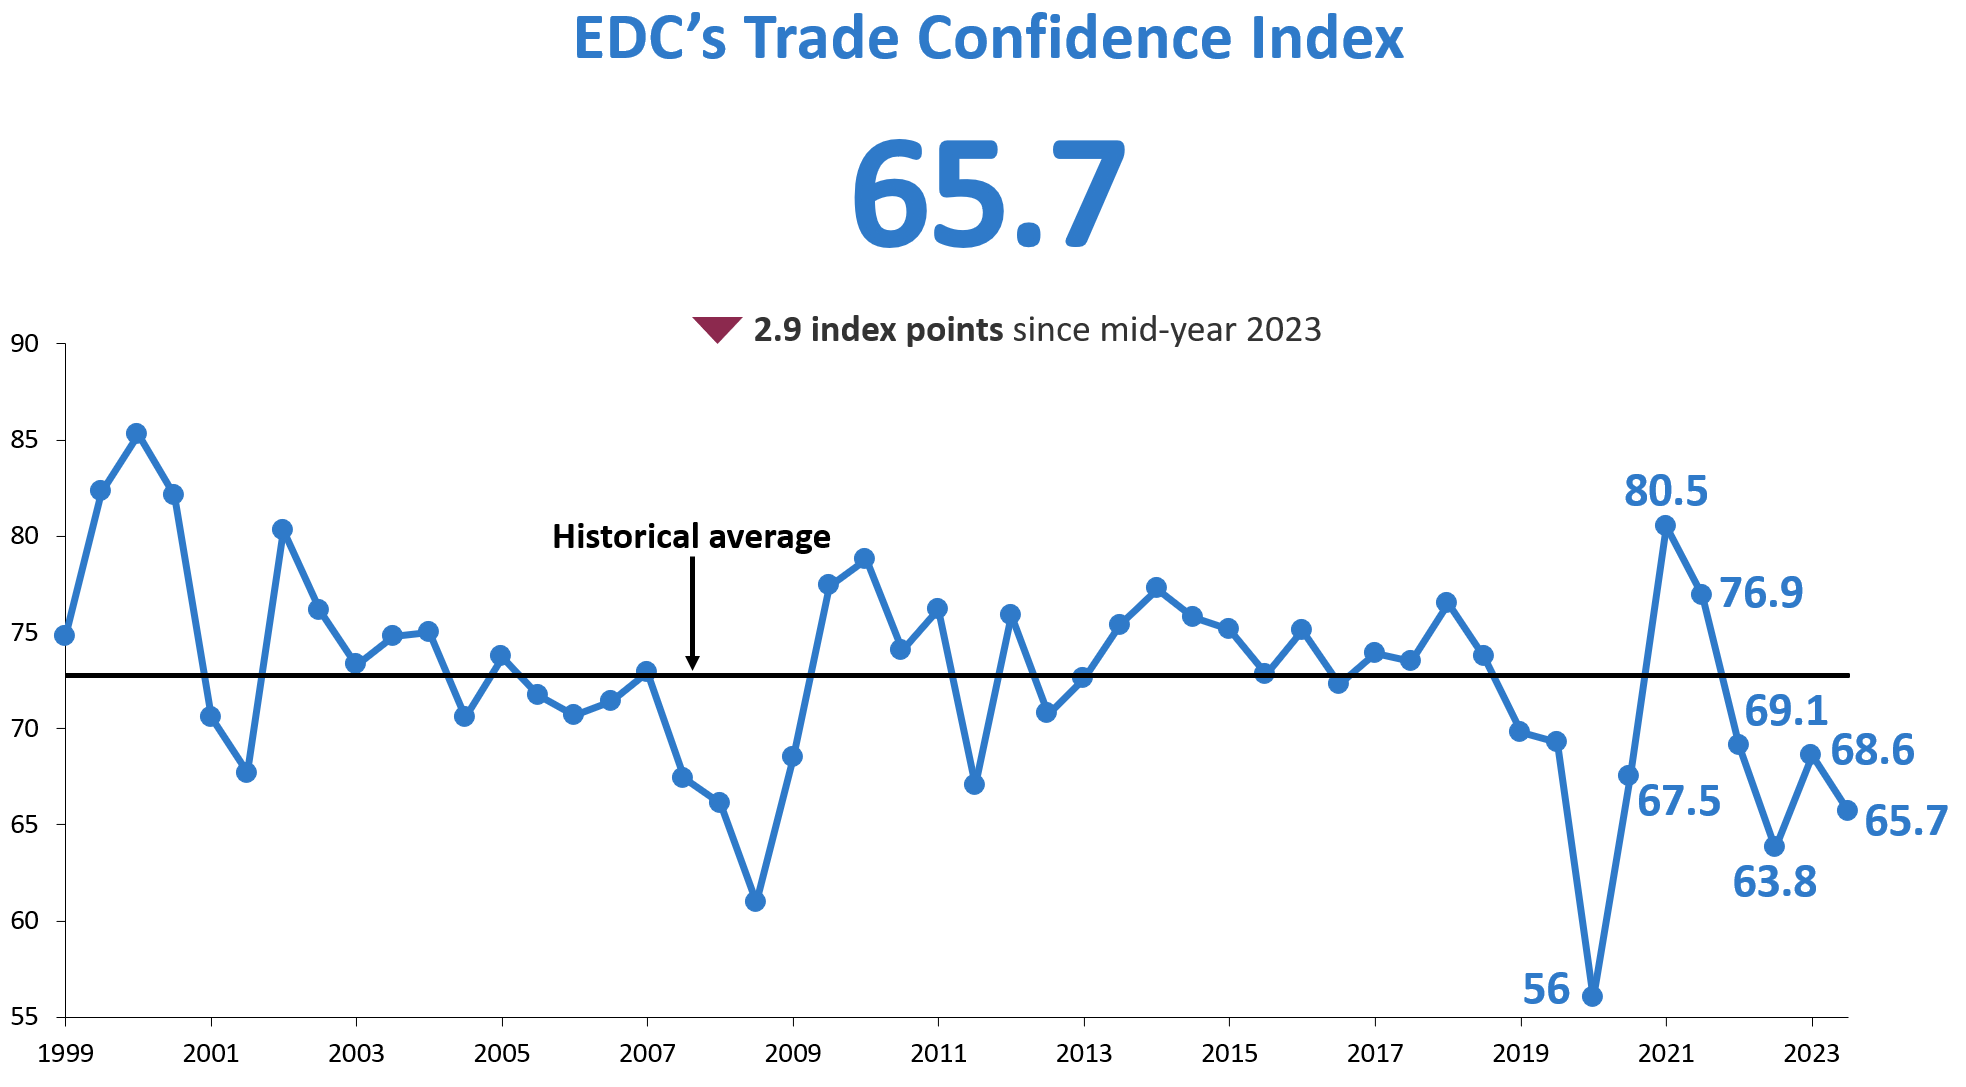 Trade confidence jumps to 70.1